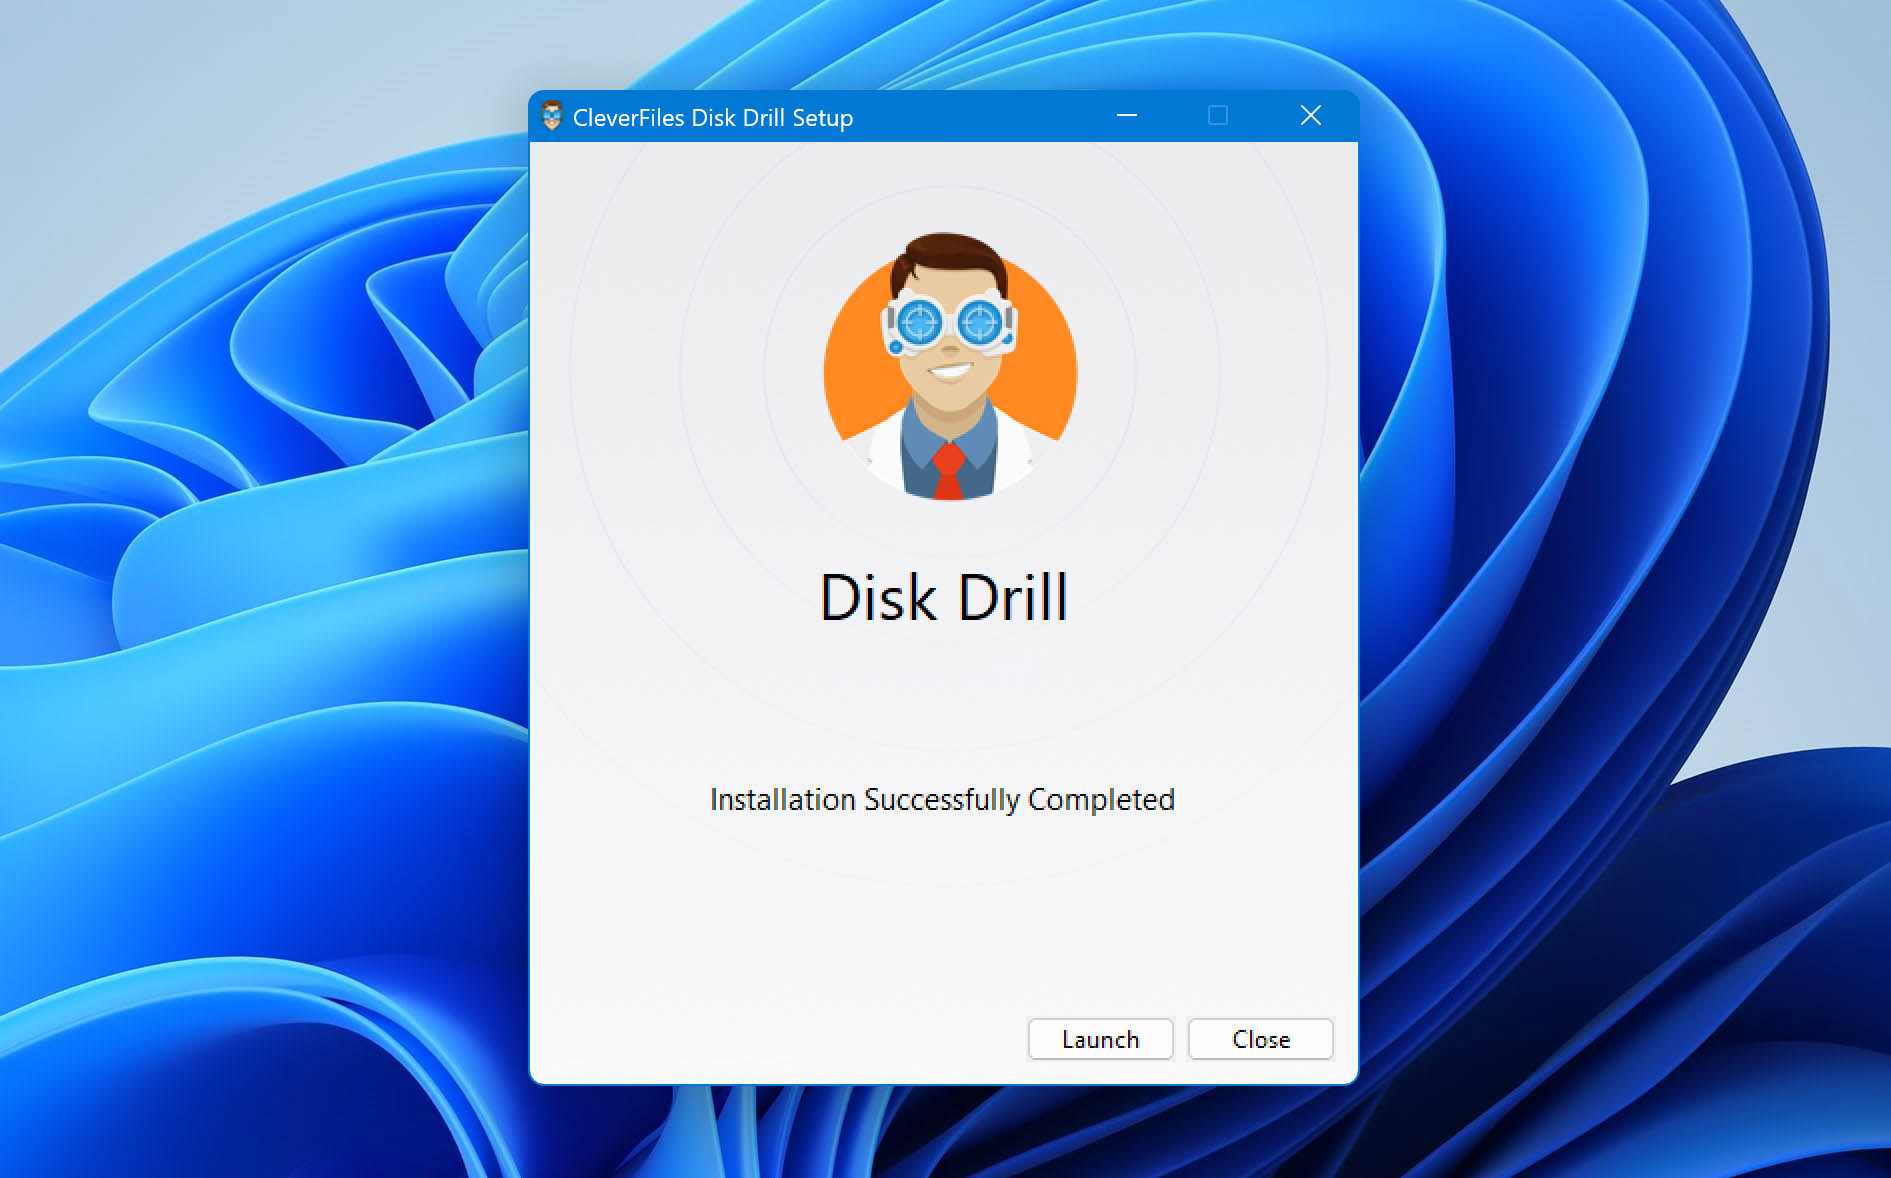 Install disk drill for Windows